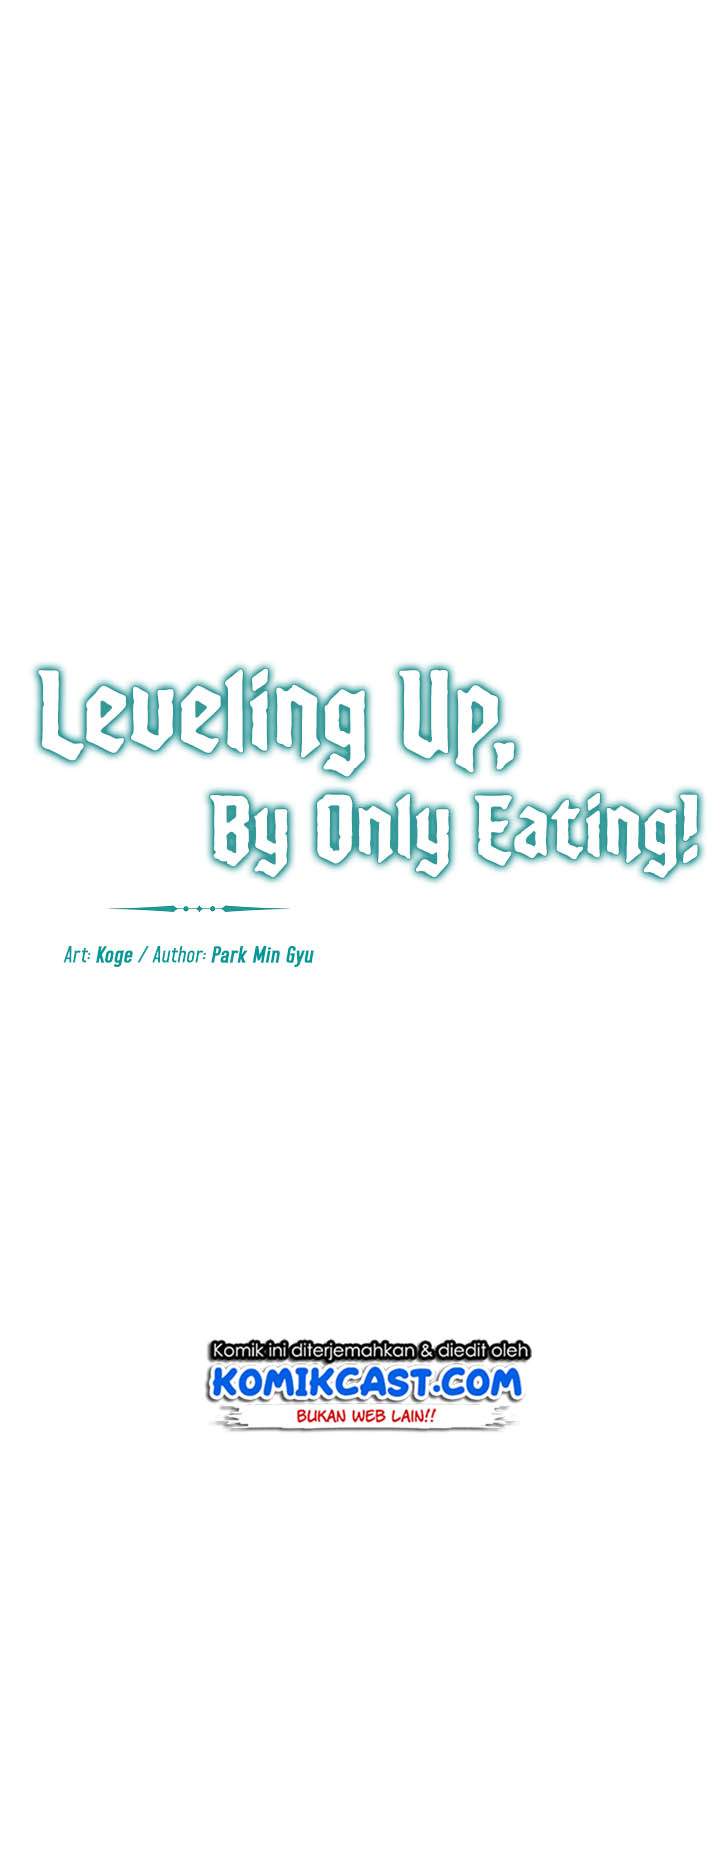 Leveling Up, By Only Eating! (Gourmet Gaming) Chapter 08 - 399